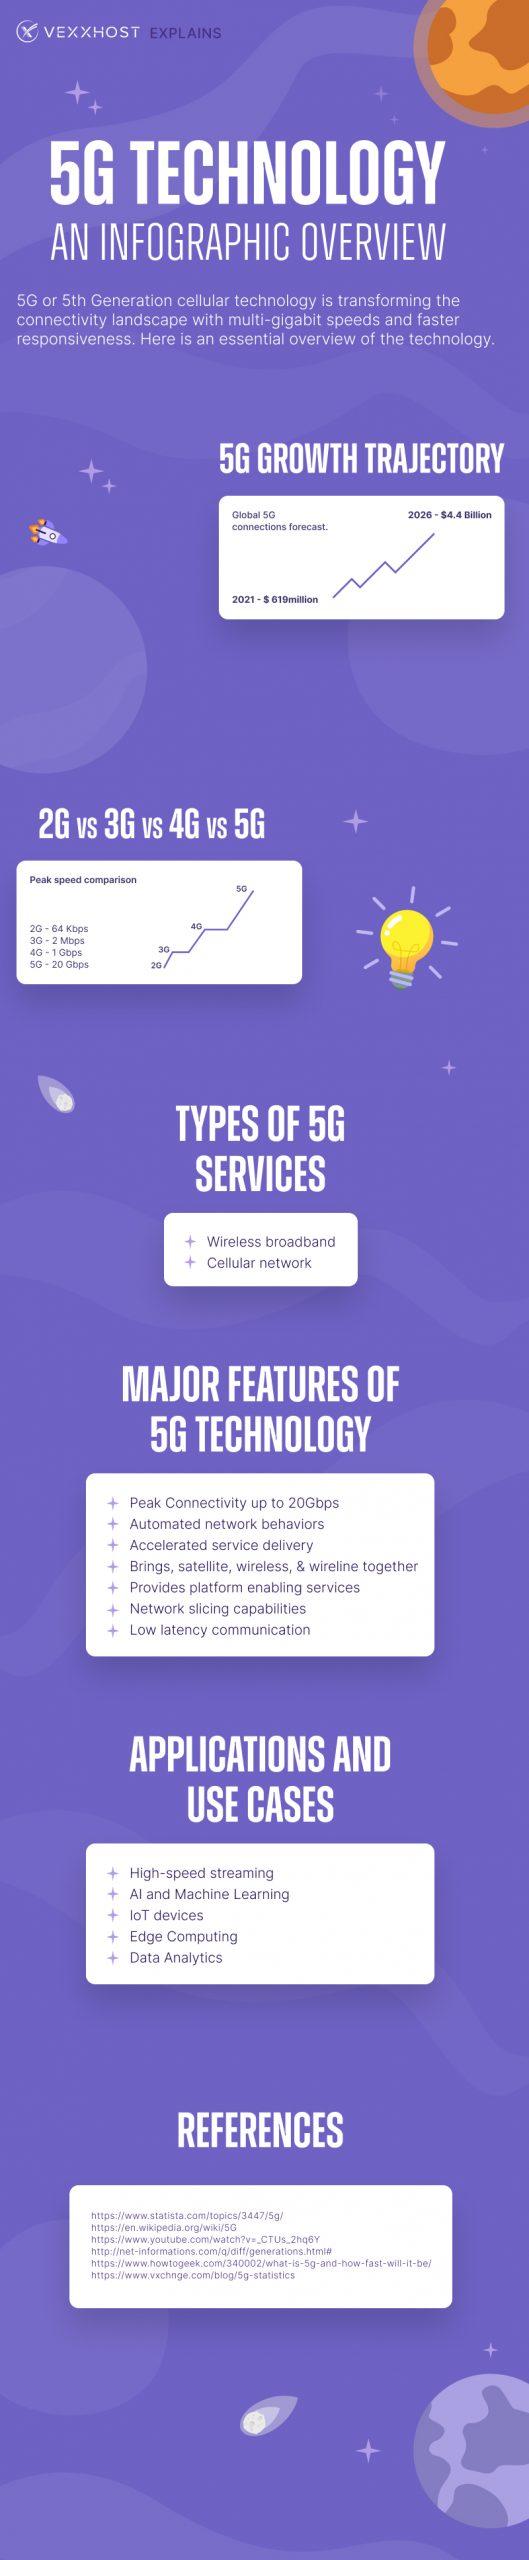 5G Technology - An Infographic Overview